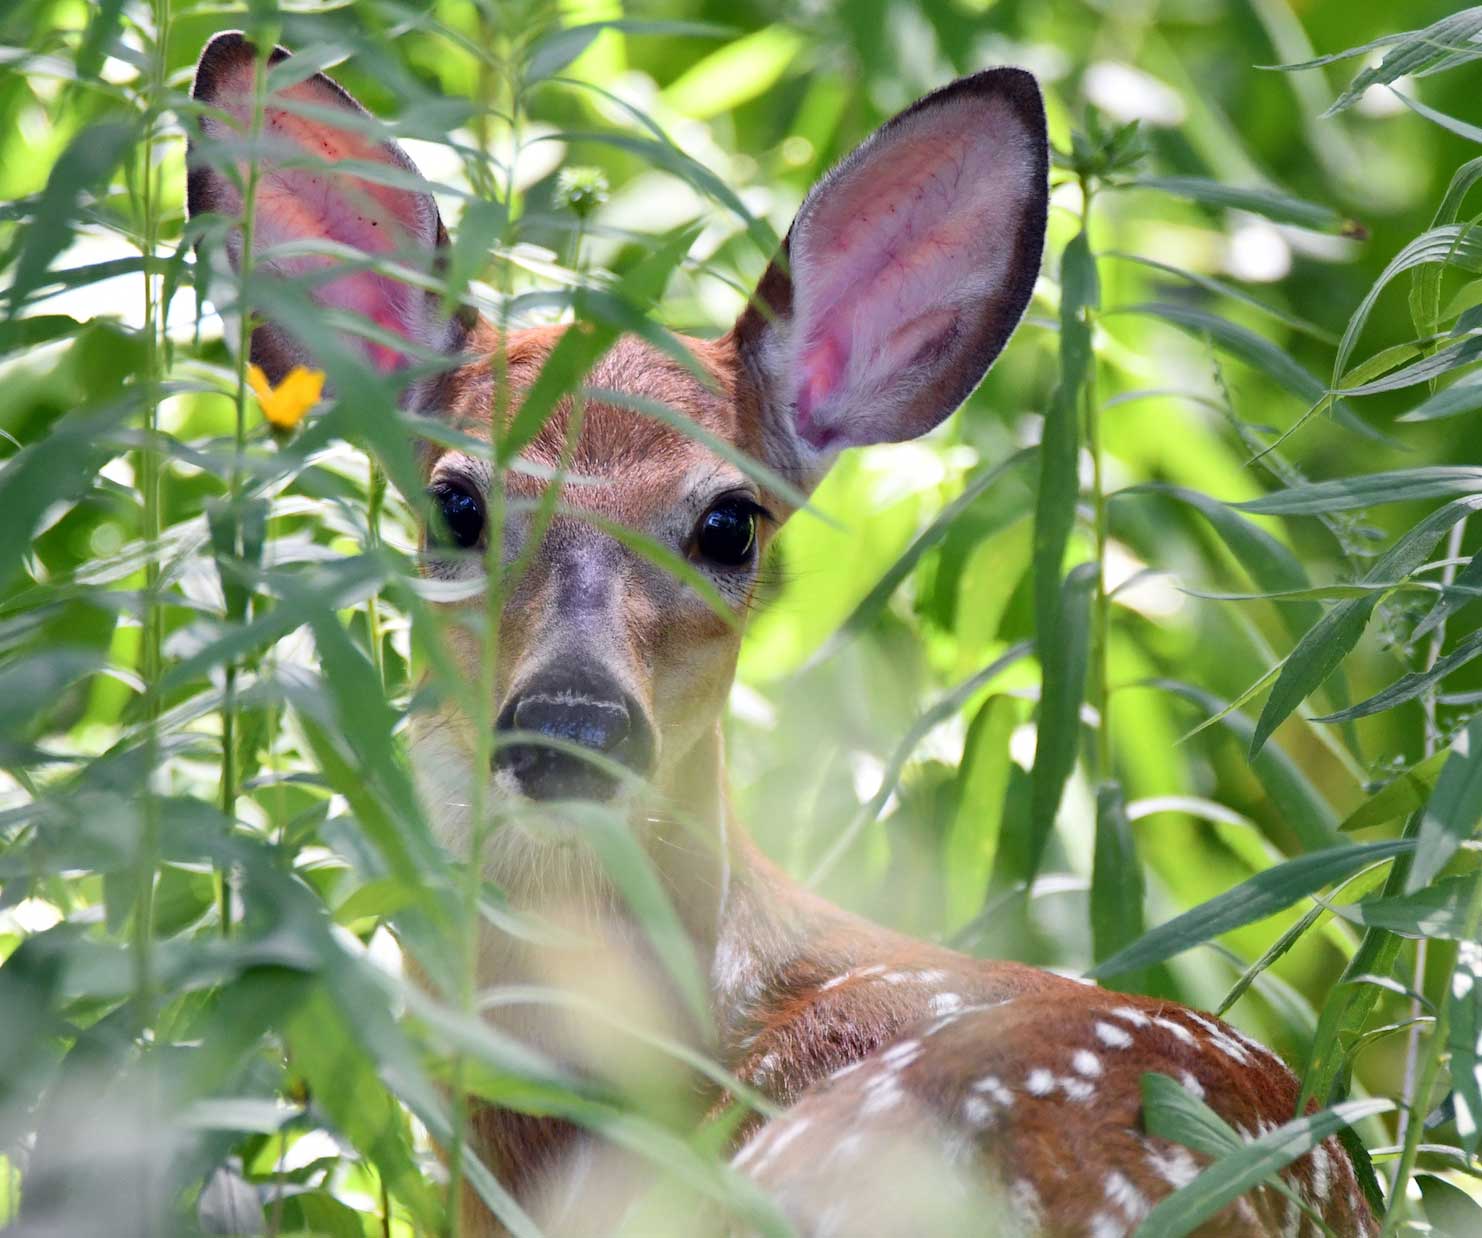 A fawn standing in tall vegetation.